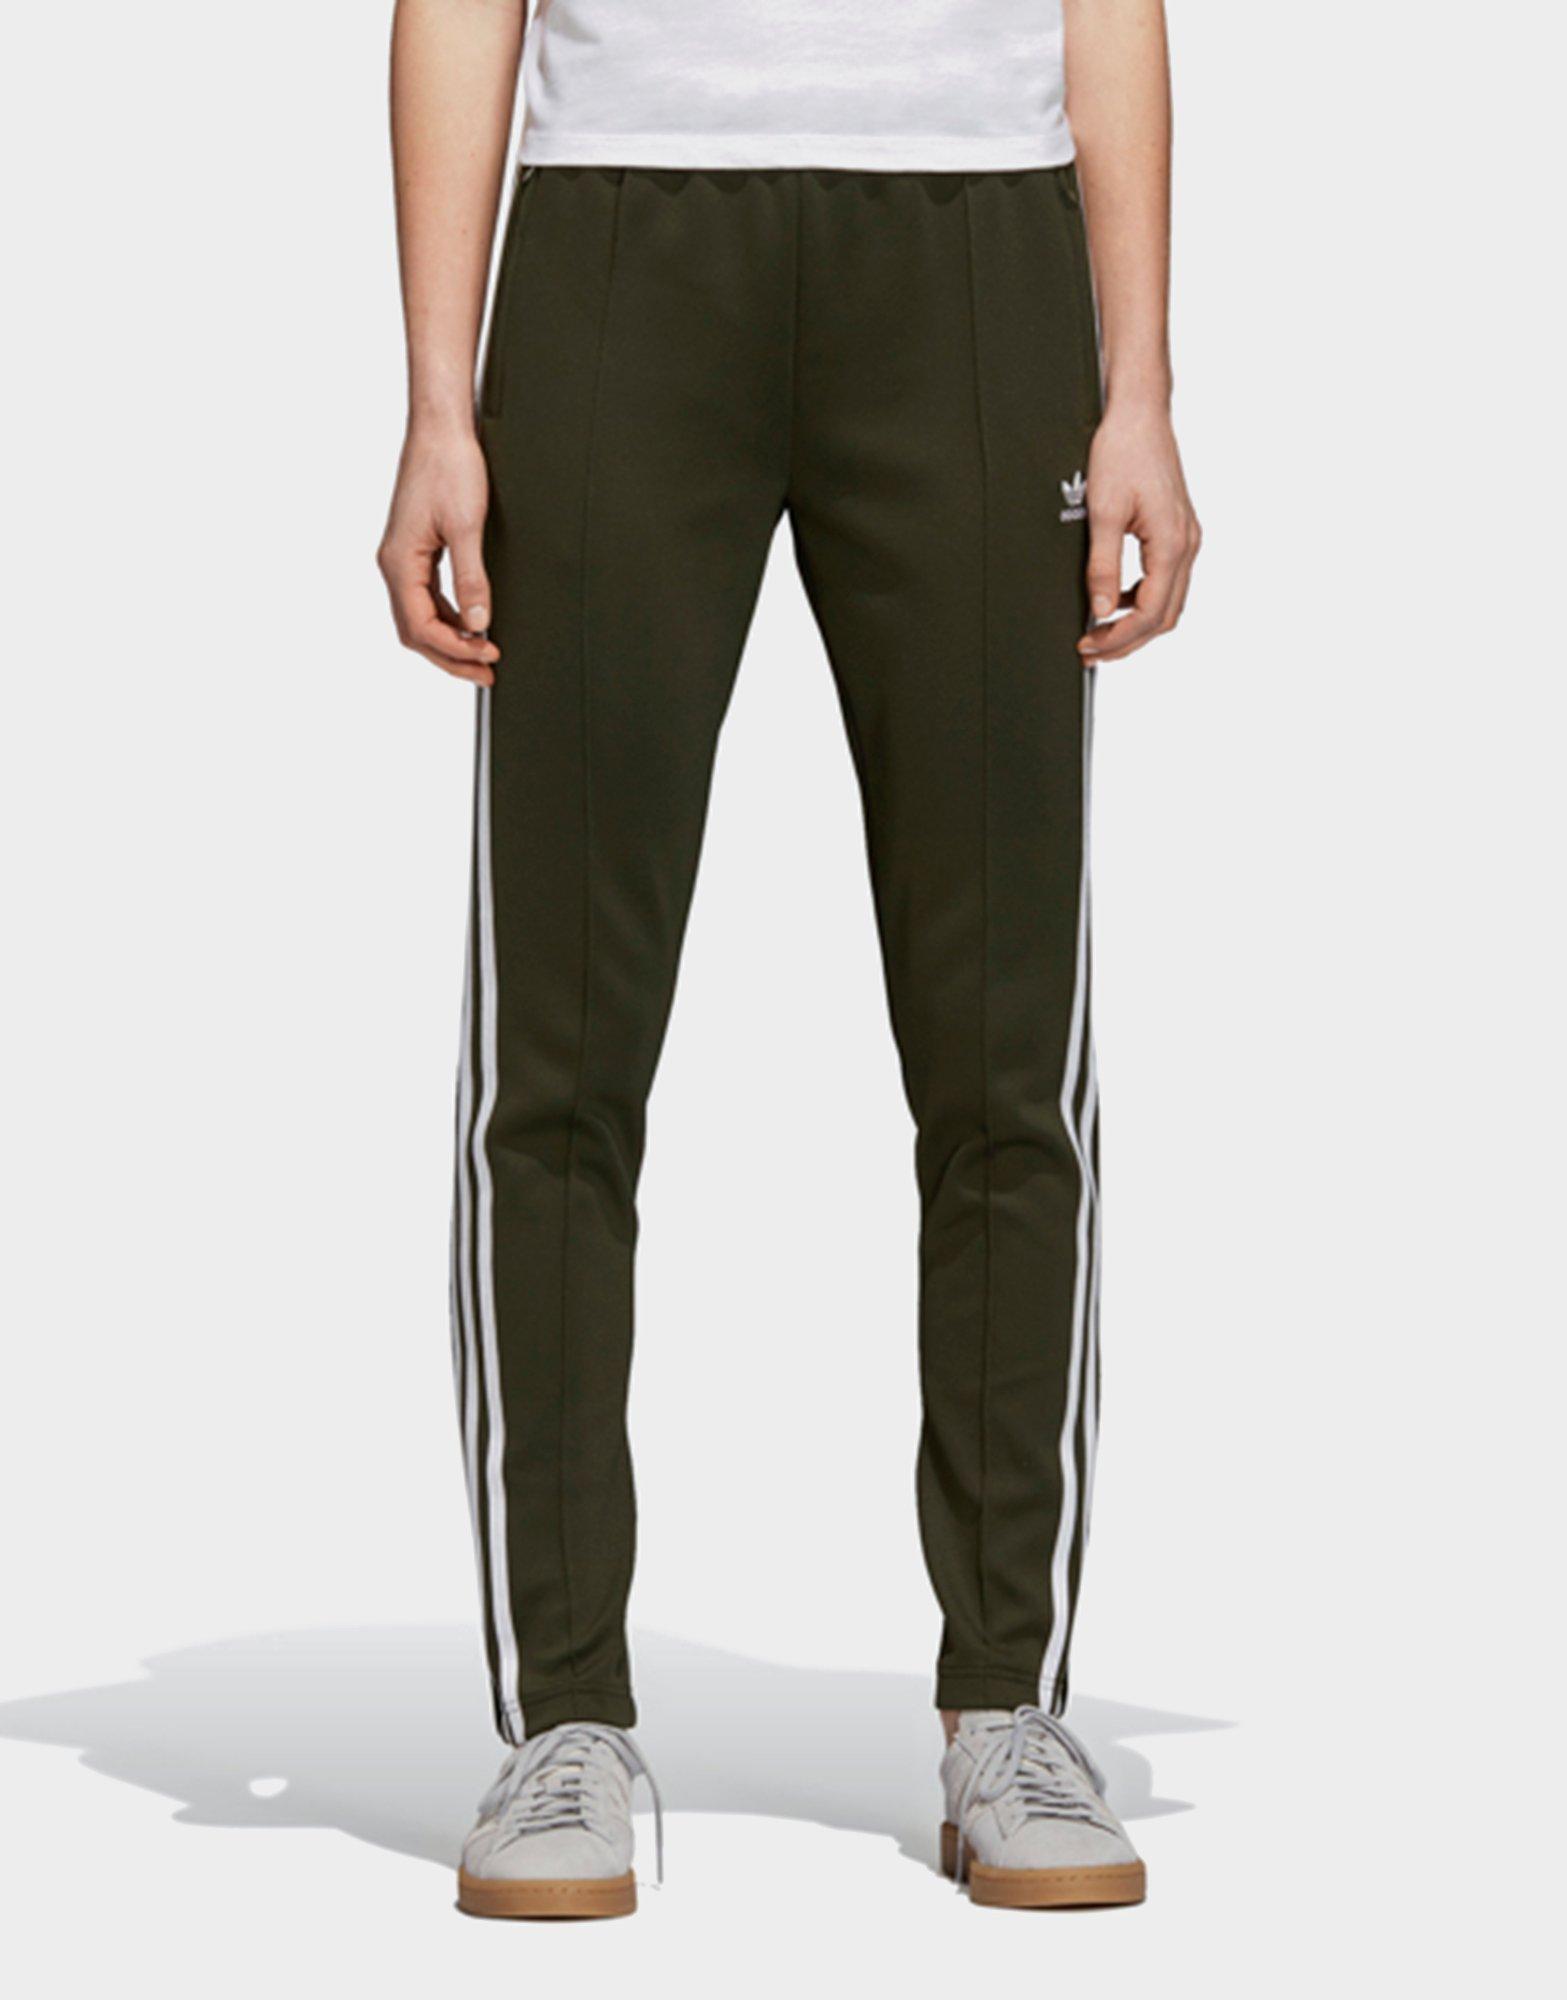 night cargo adidas pants for Sale OFF 78%